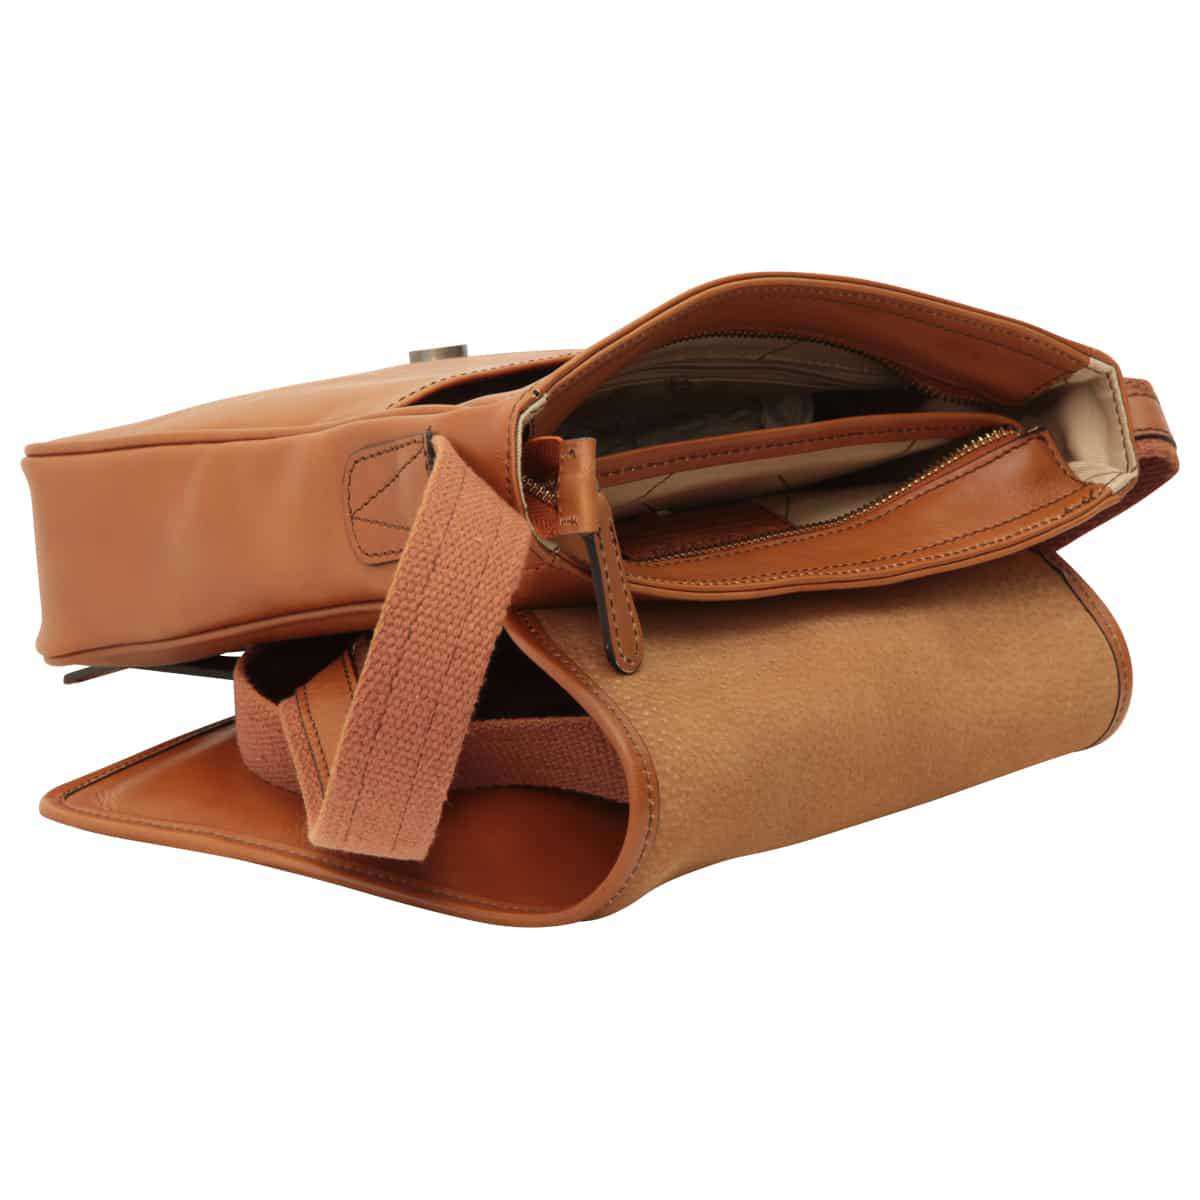 Small leather bag with magnetic closure - Brown Colonial | 406689CO UK | Old Angler Firenze